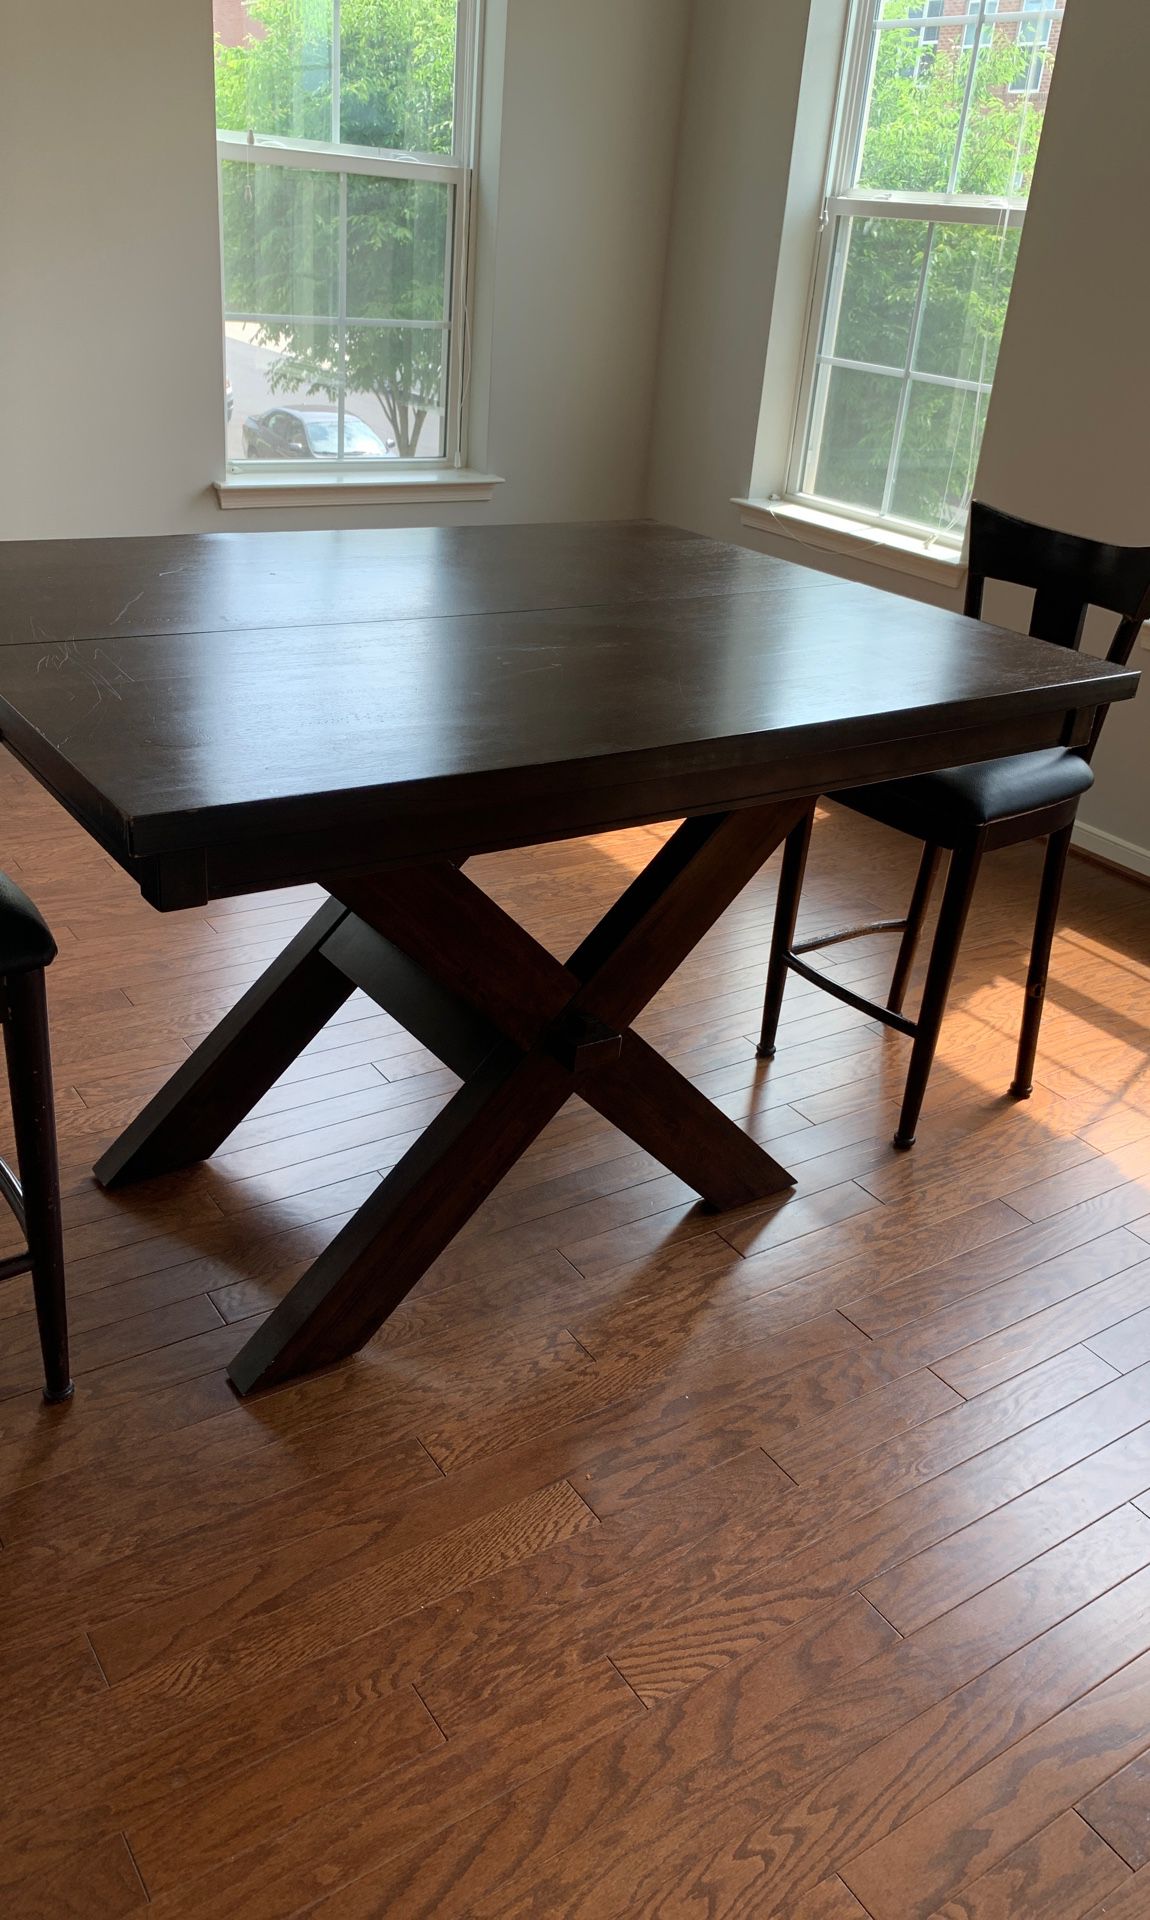 Kitchen/ dining room table for sale. Pic is closed up but can open up to larger table